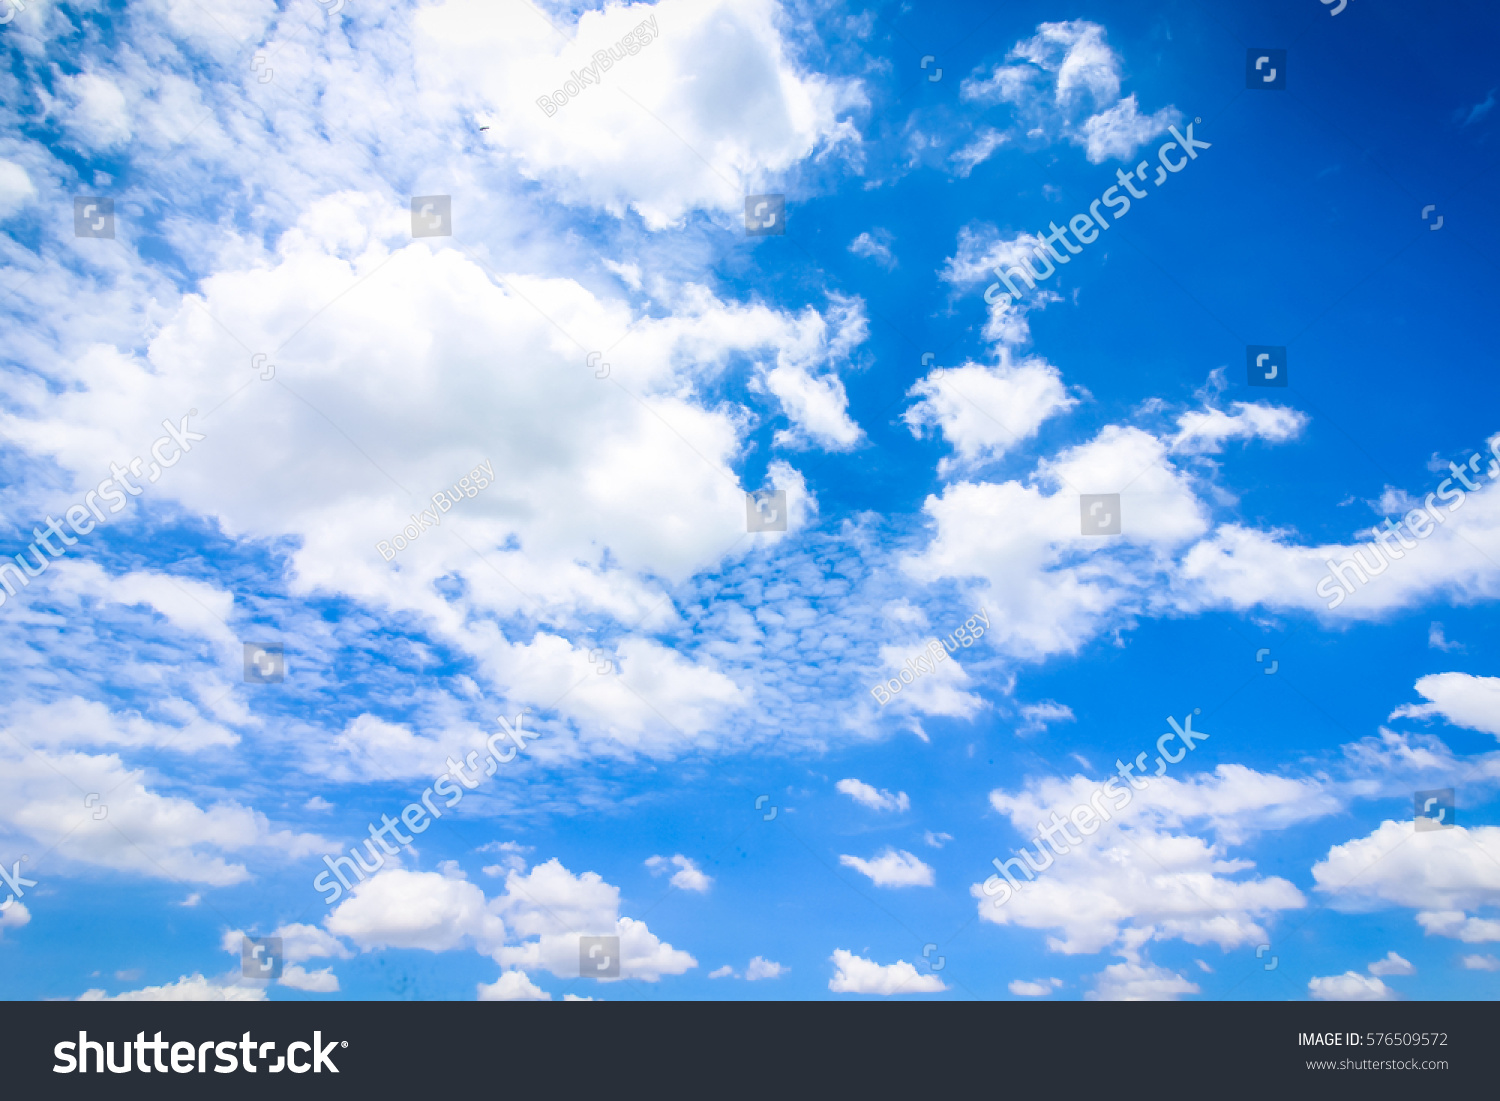 Clear Blue Sky Cloudy Background Wallpaper Stock Photo 576509572